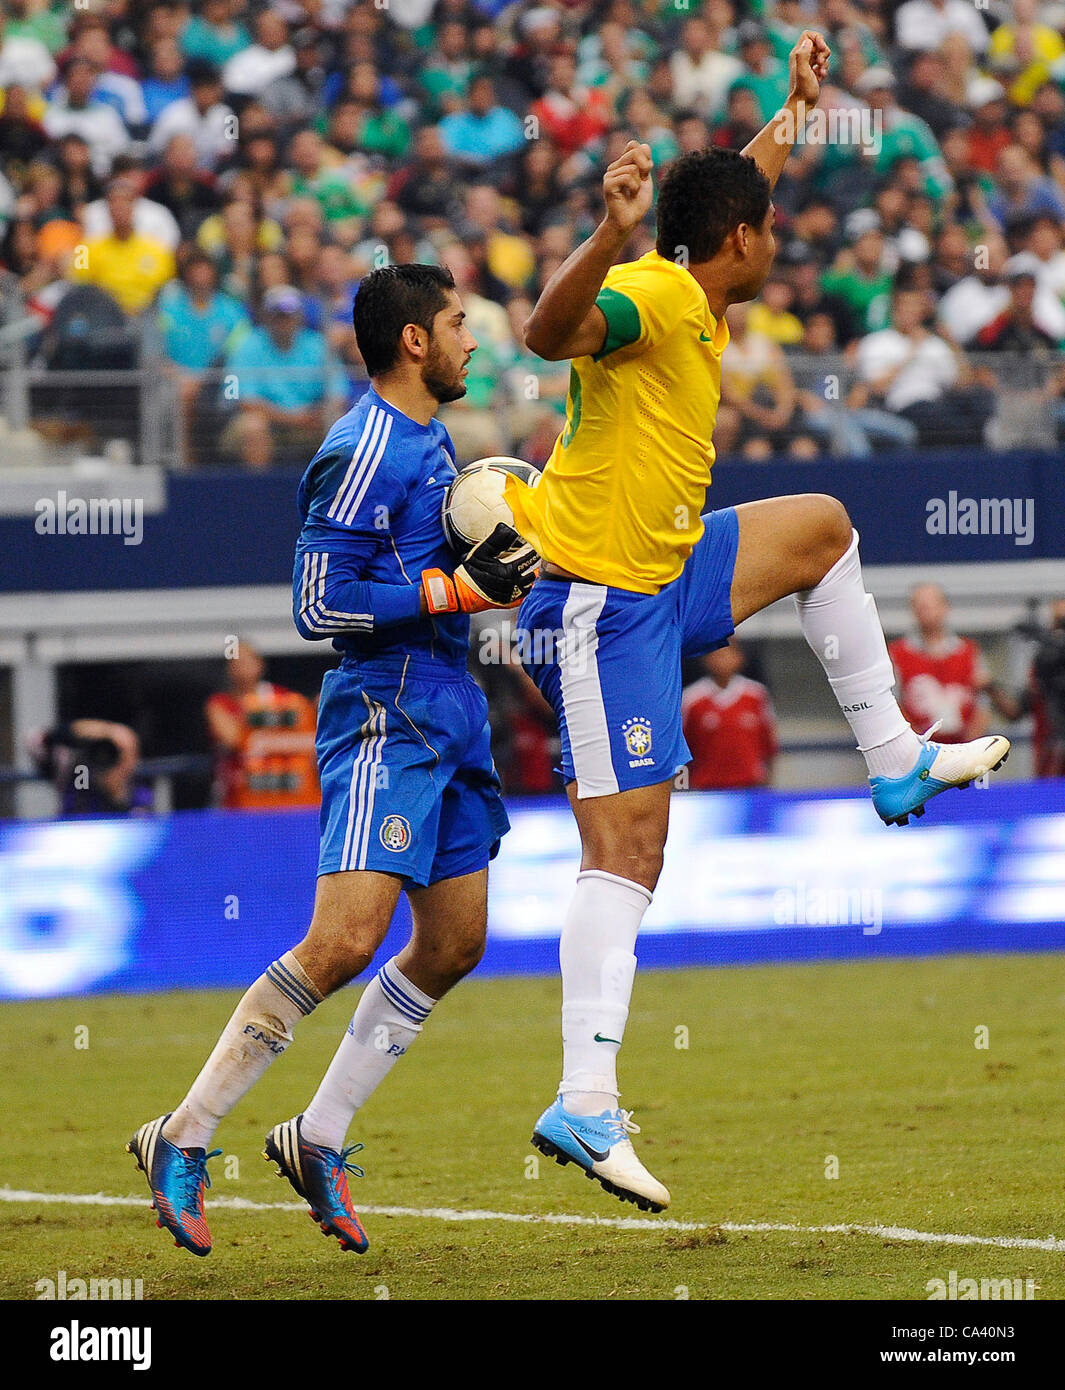 June 3, 2012 - Arlington, Texas, USA - June 3, 2012. Arlington, Texas, USA. Goalkeeper Jesus Corona of Mexico defends against Casimiro (15) of Brazil in the second half as the Brazilian National soccer team played the Mexican National soccer team at Cowboys Stadium in Arlington, Texas. Mexico defeat Stock Photo